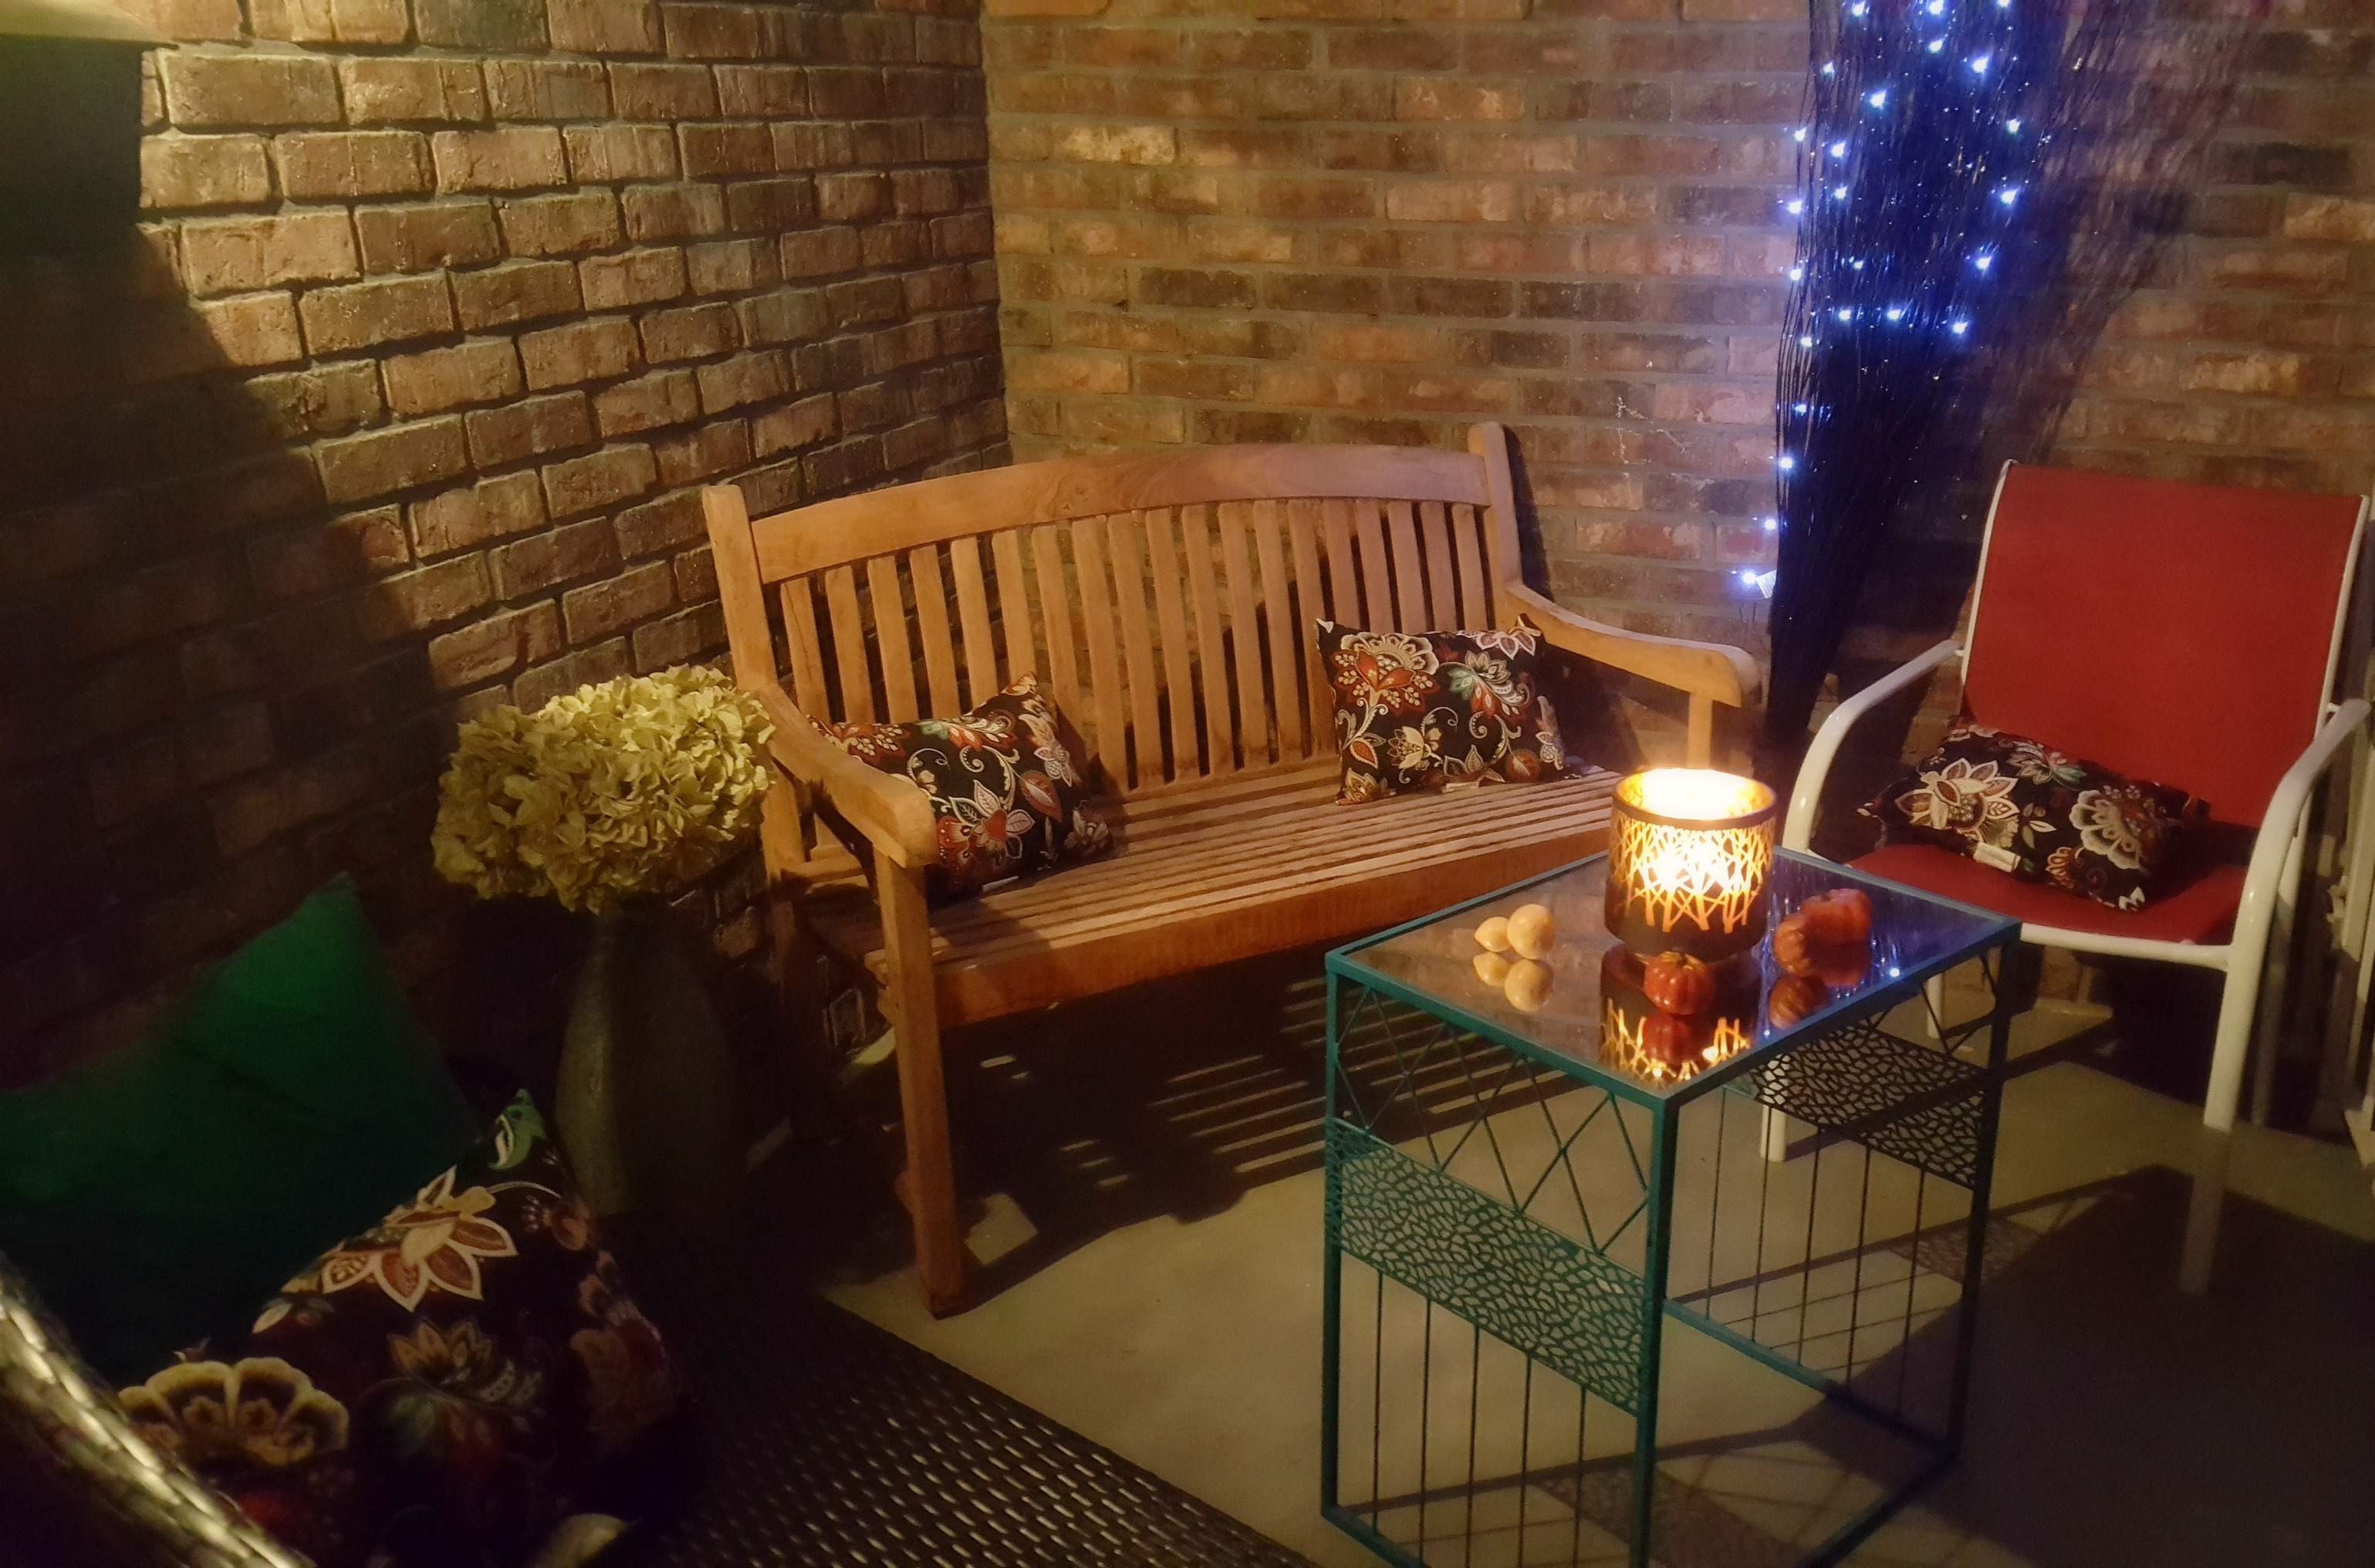 Outdoor Holiday Decorating